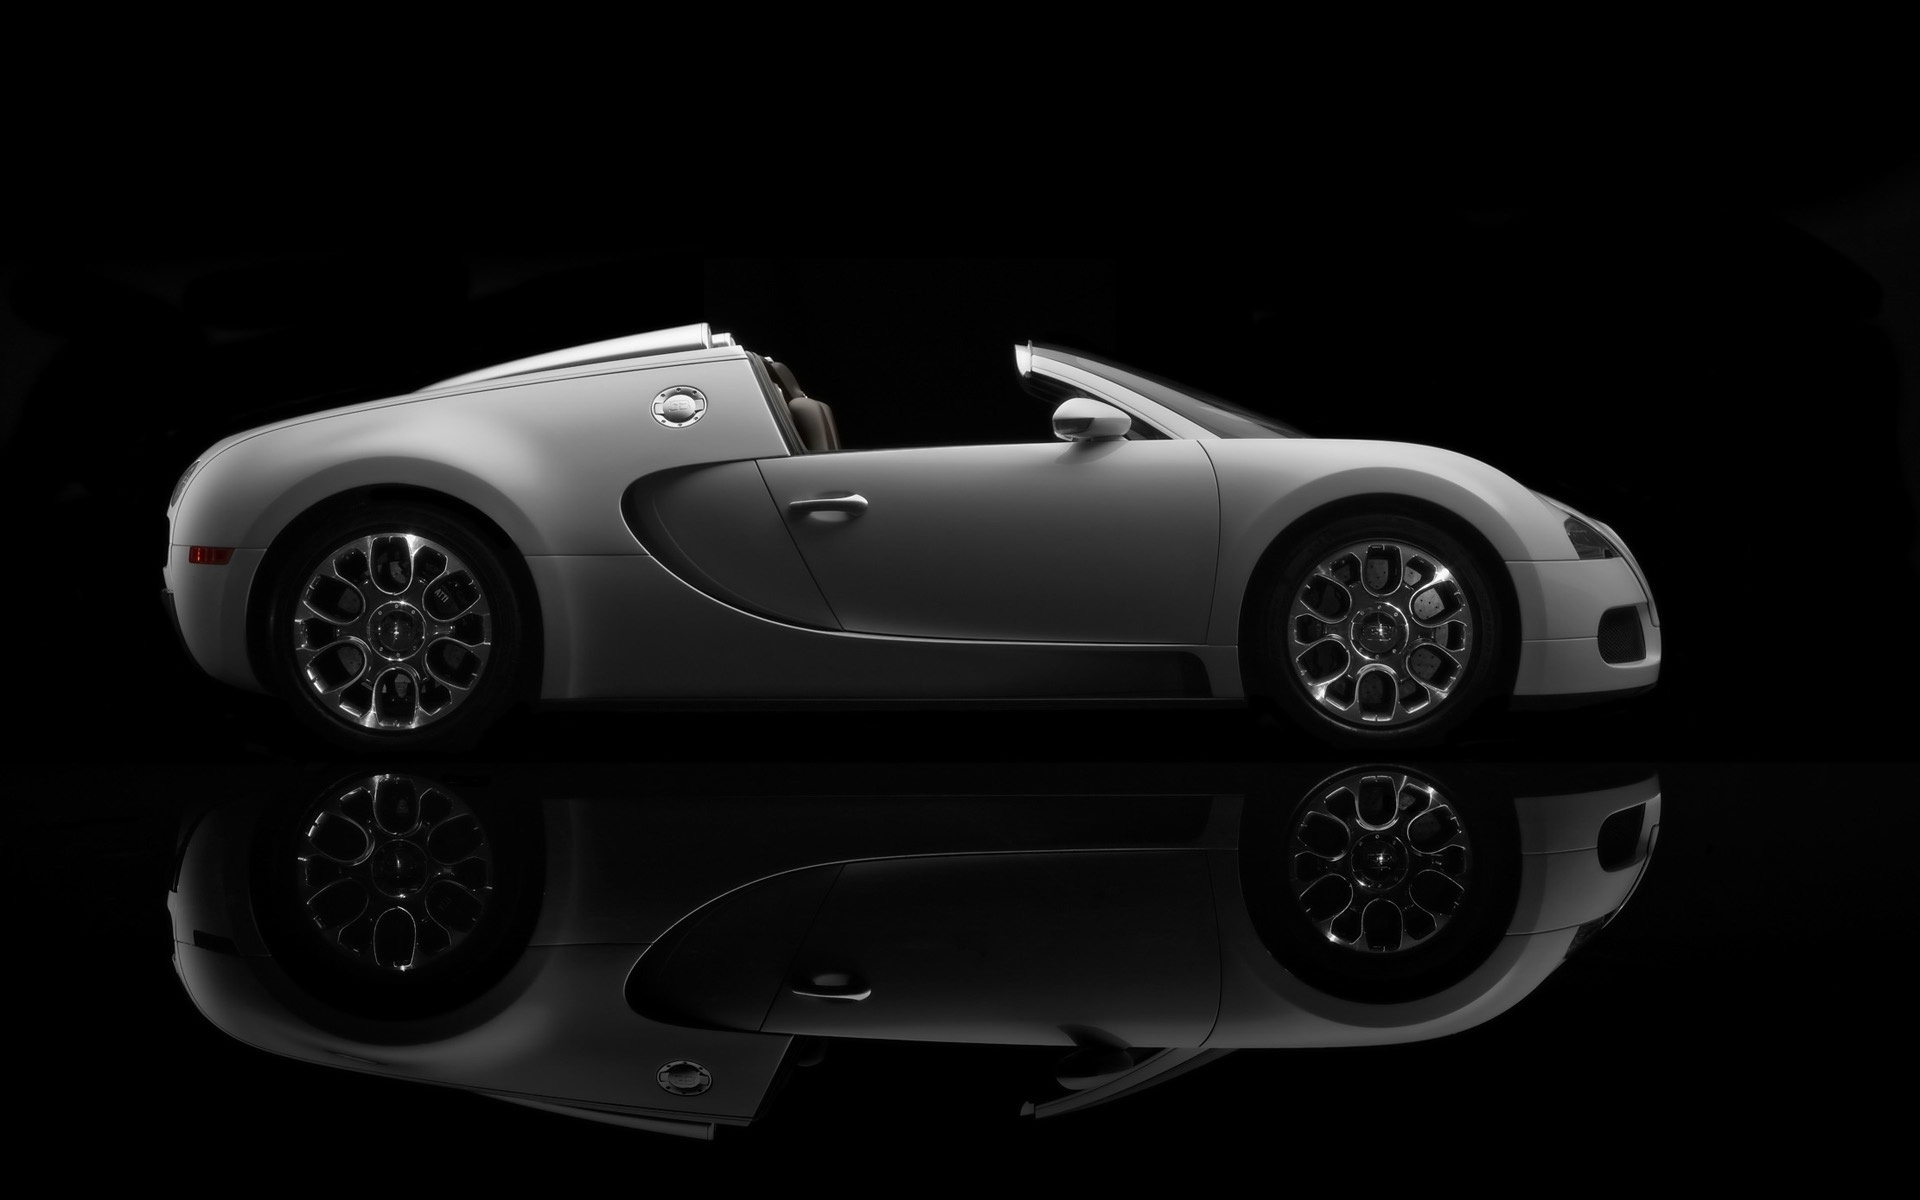 Bugatti Veyron 16.4 Grand Sport Production 2009 Version - Side Topless for 1920 x 1200 widescreen resolution